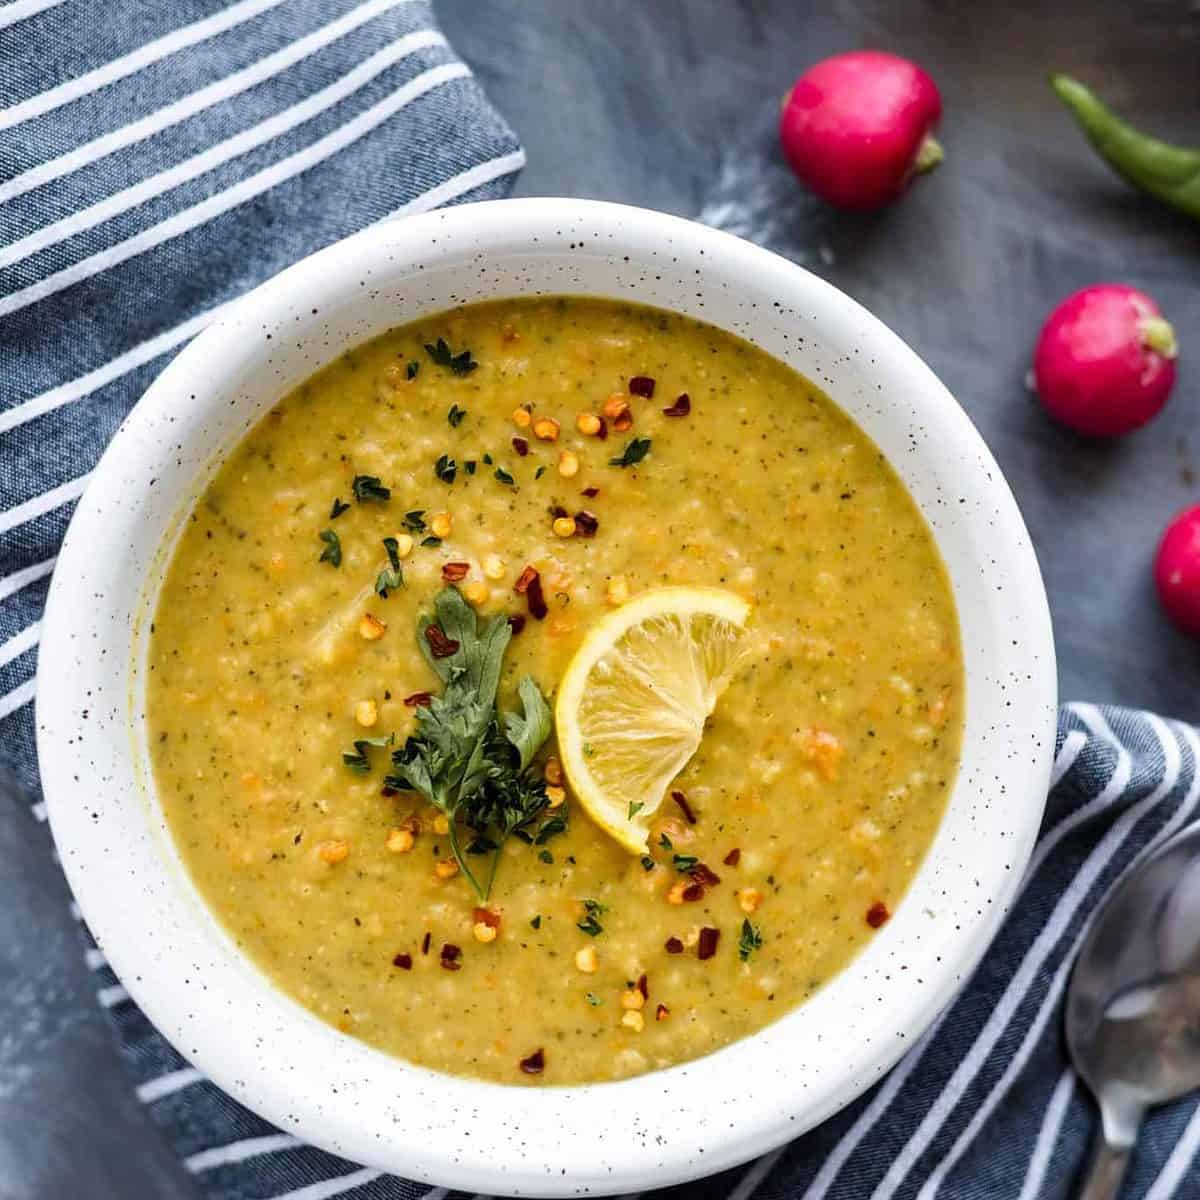  Creamy and full of flavor, this vegan soup is a delightful surprise for your senses